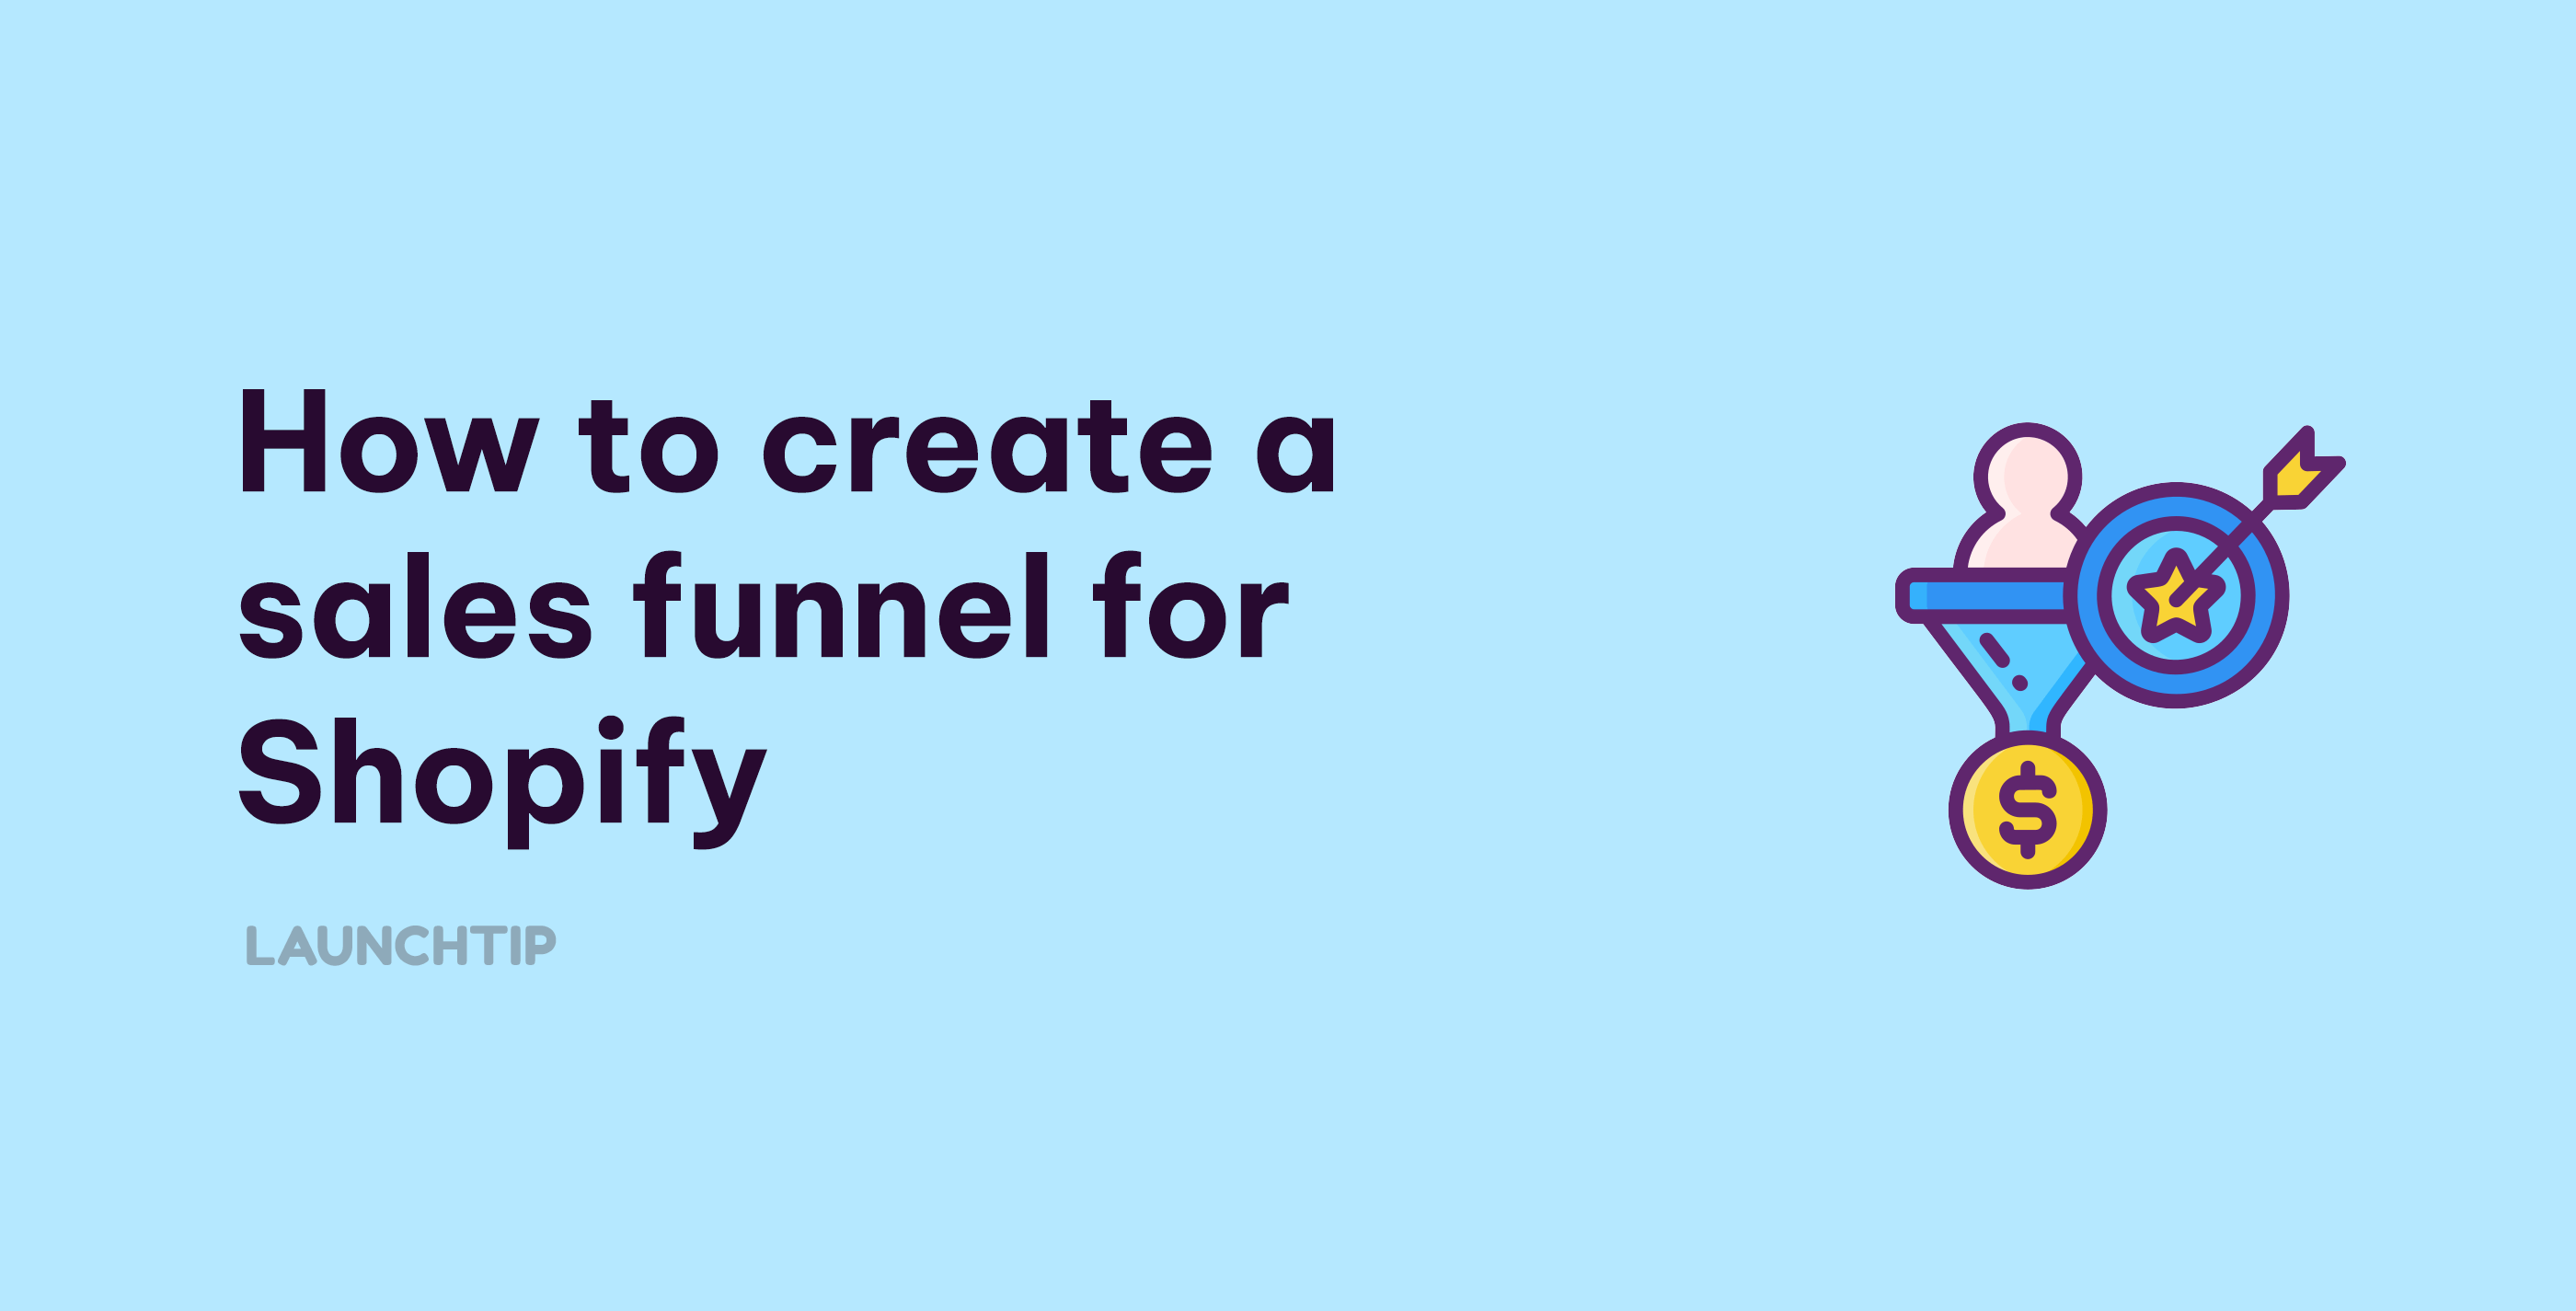 How to create a sales funnel for Shopify